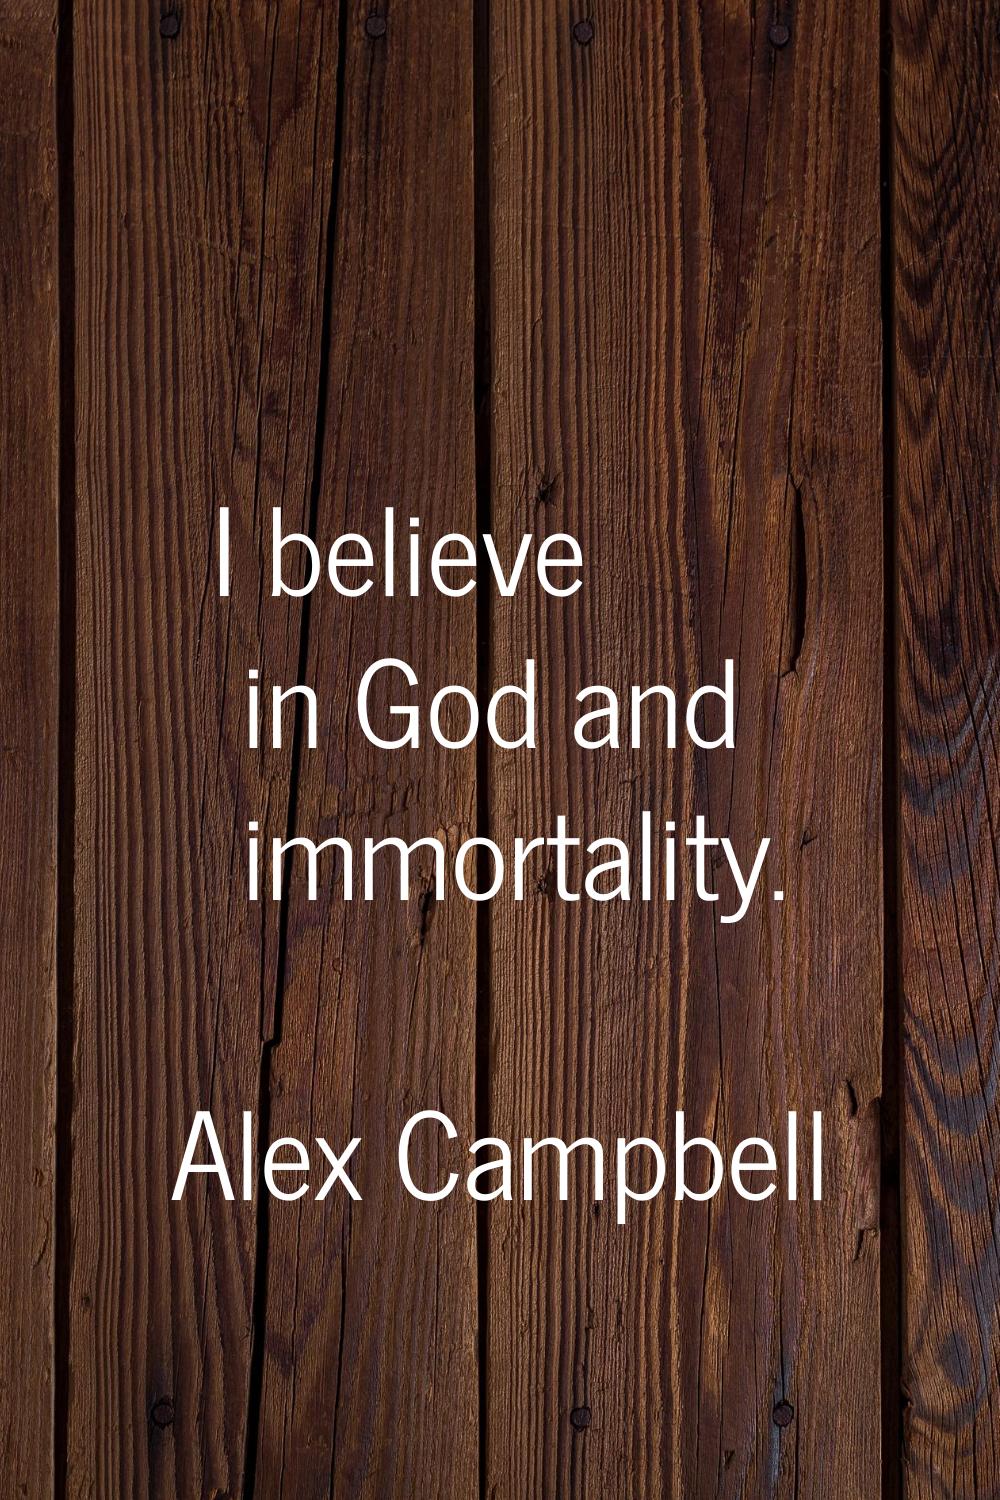 I believe in God and immortality.